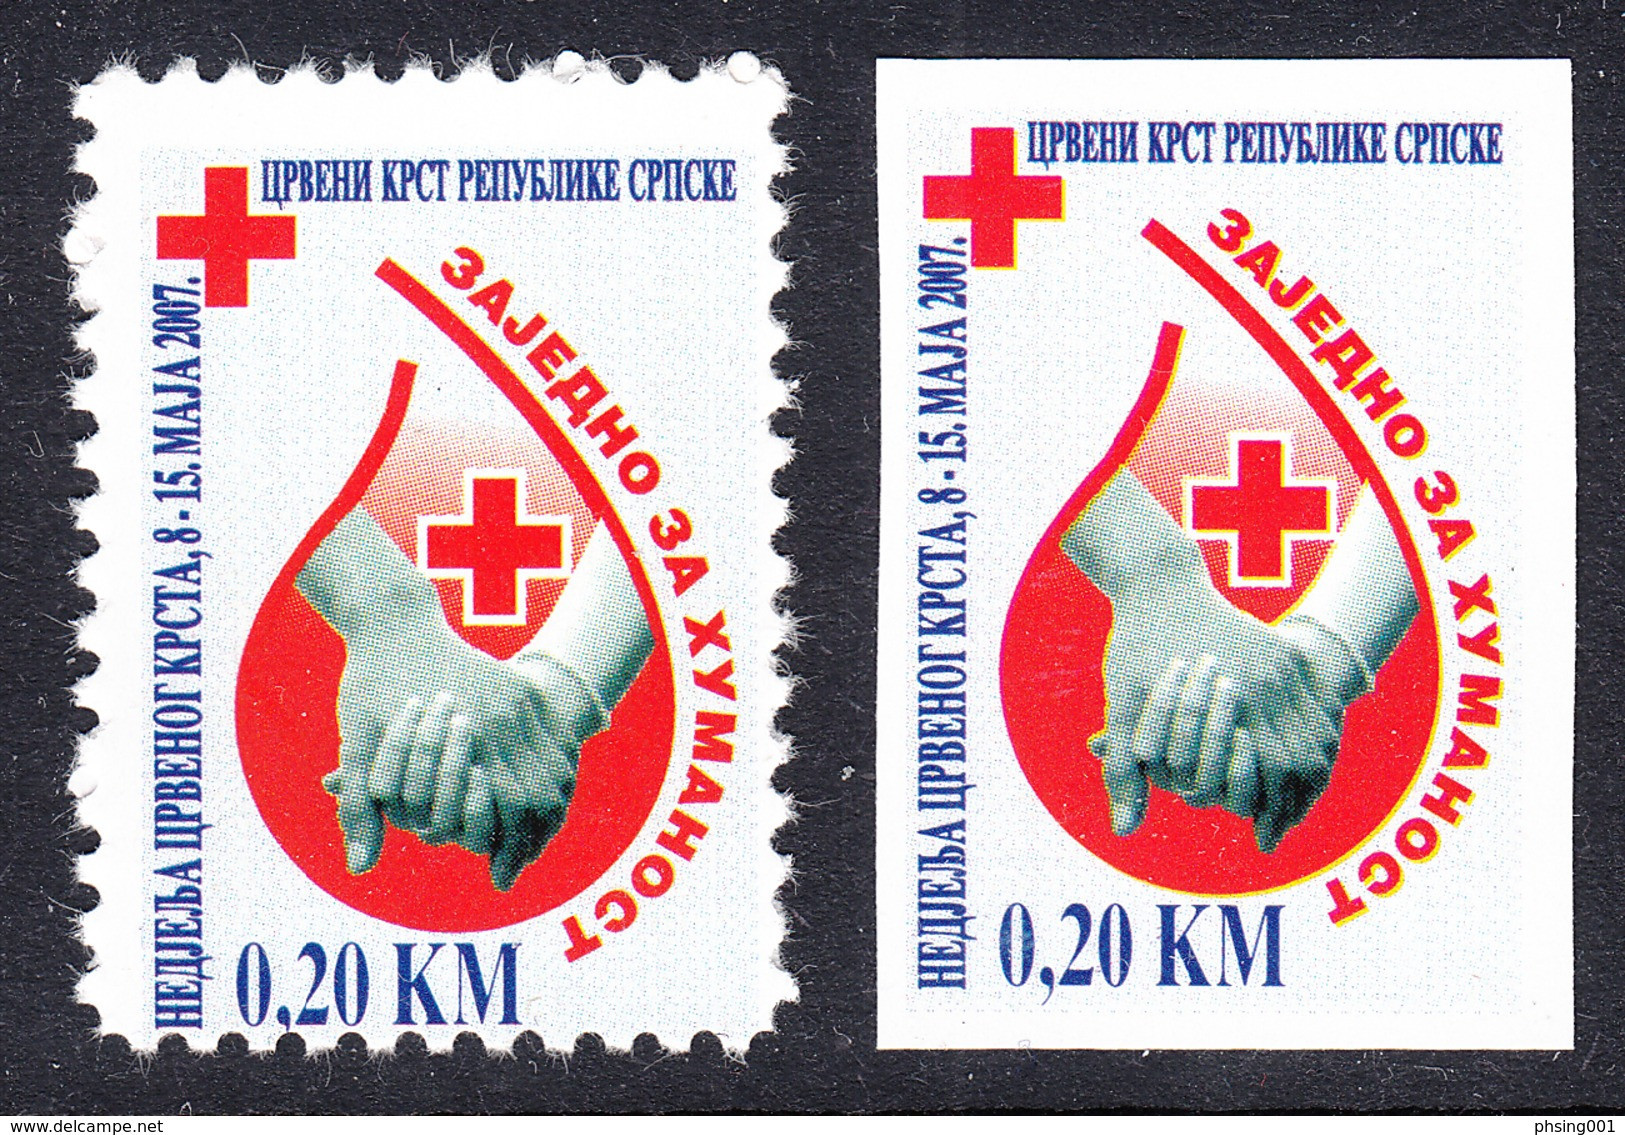 Bosnia Serbia 2007 Red Cross Rotes Kreuz Croix Rouge, Tax Charity Surcharge, Perforated + Imperforated Stamp MNH - Bosnien-Herzegowina